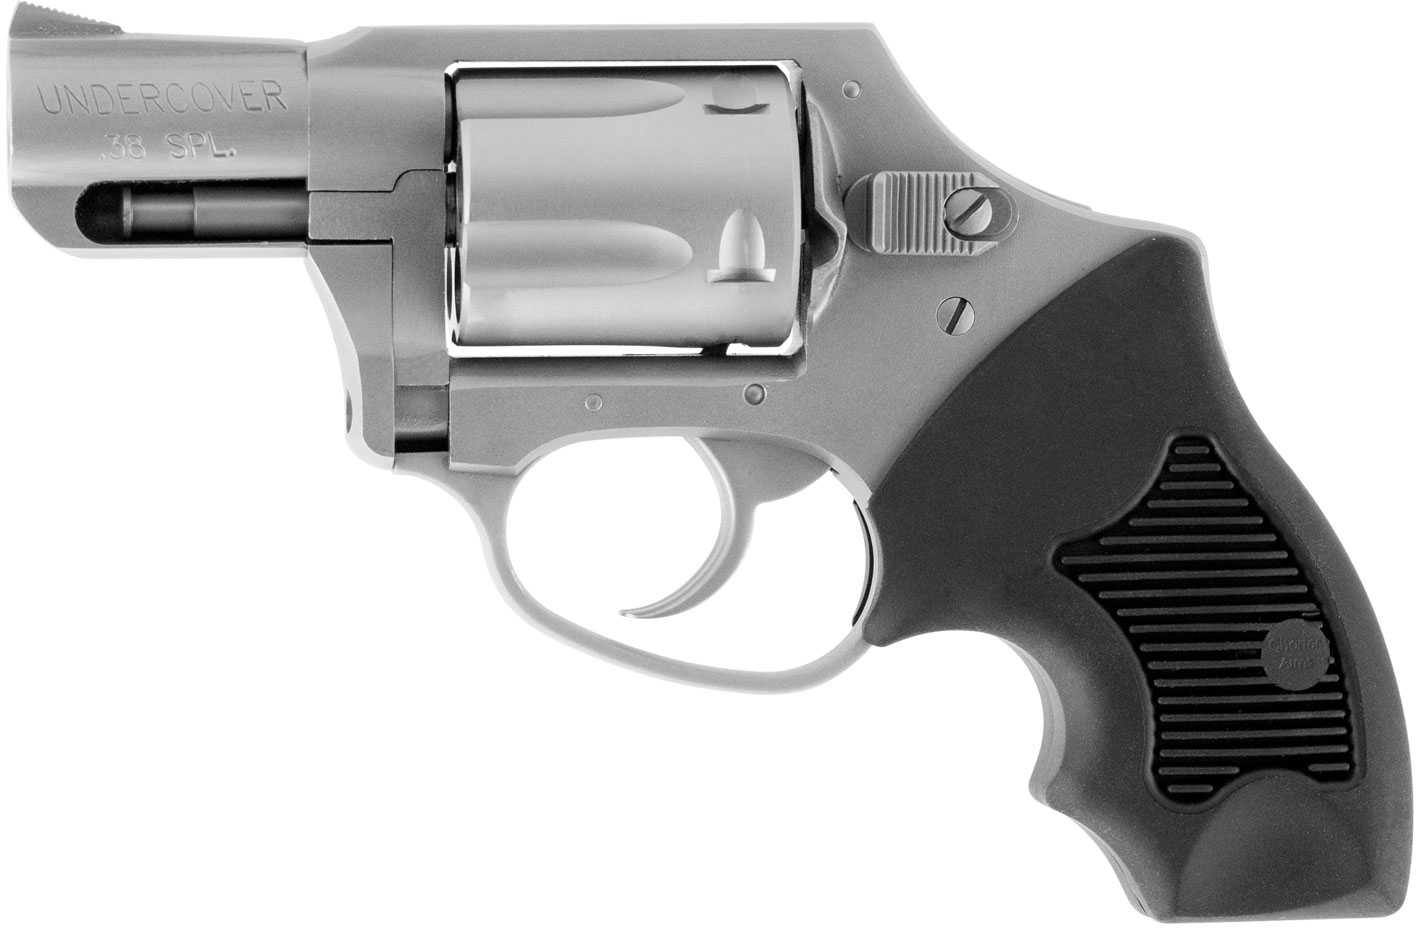 Charter Arms Undercover Standard Hammerless Revolver 38 Special 5 Shot 2" Barrel Stainless Steel Finish Black Rubber Grip